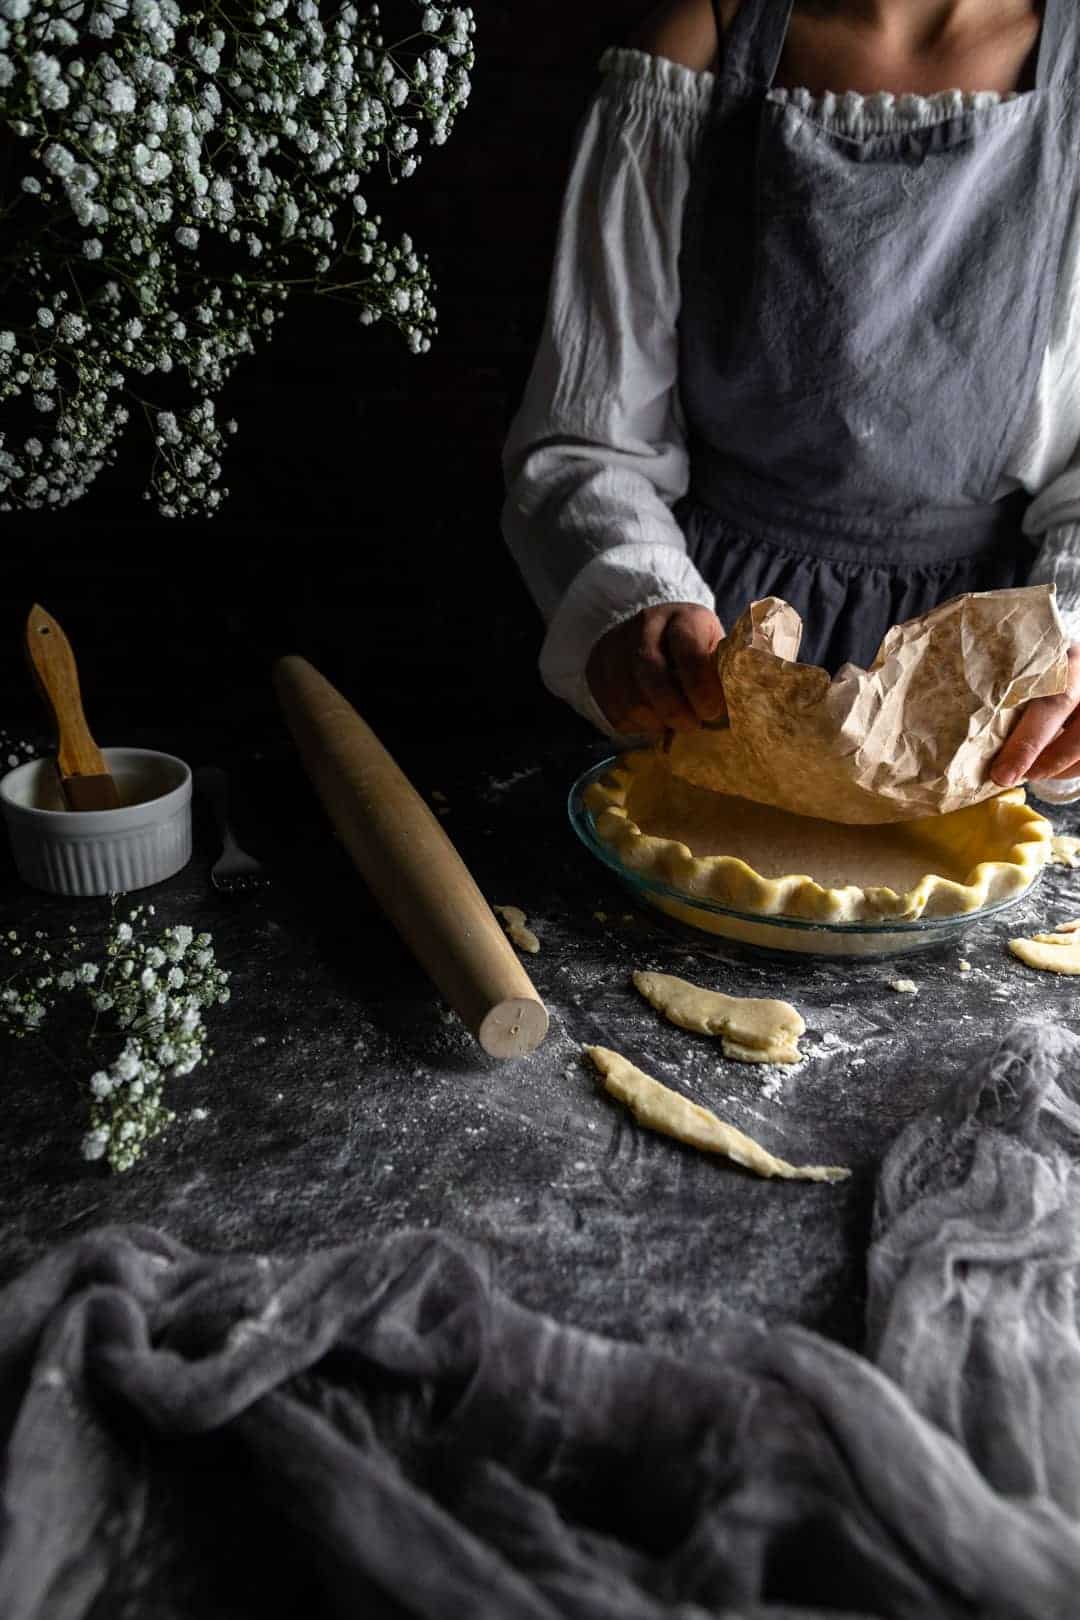 A woman placing a crumpled coffee filter into the bottom of an unbaked crimped pie crust next to a rolling pin and vase of tiny white flowers